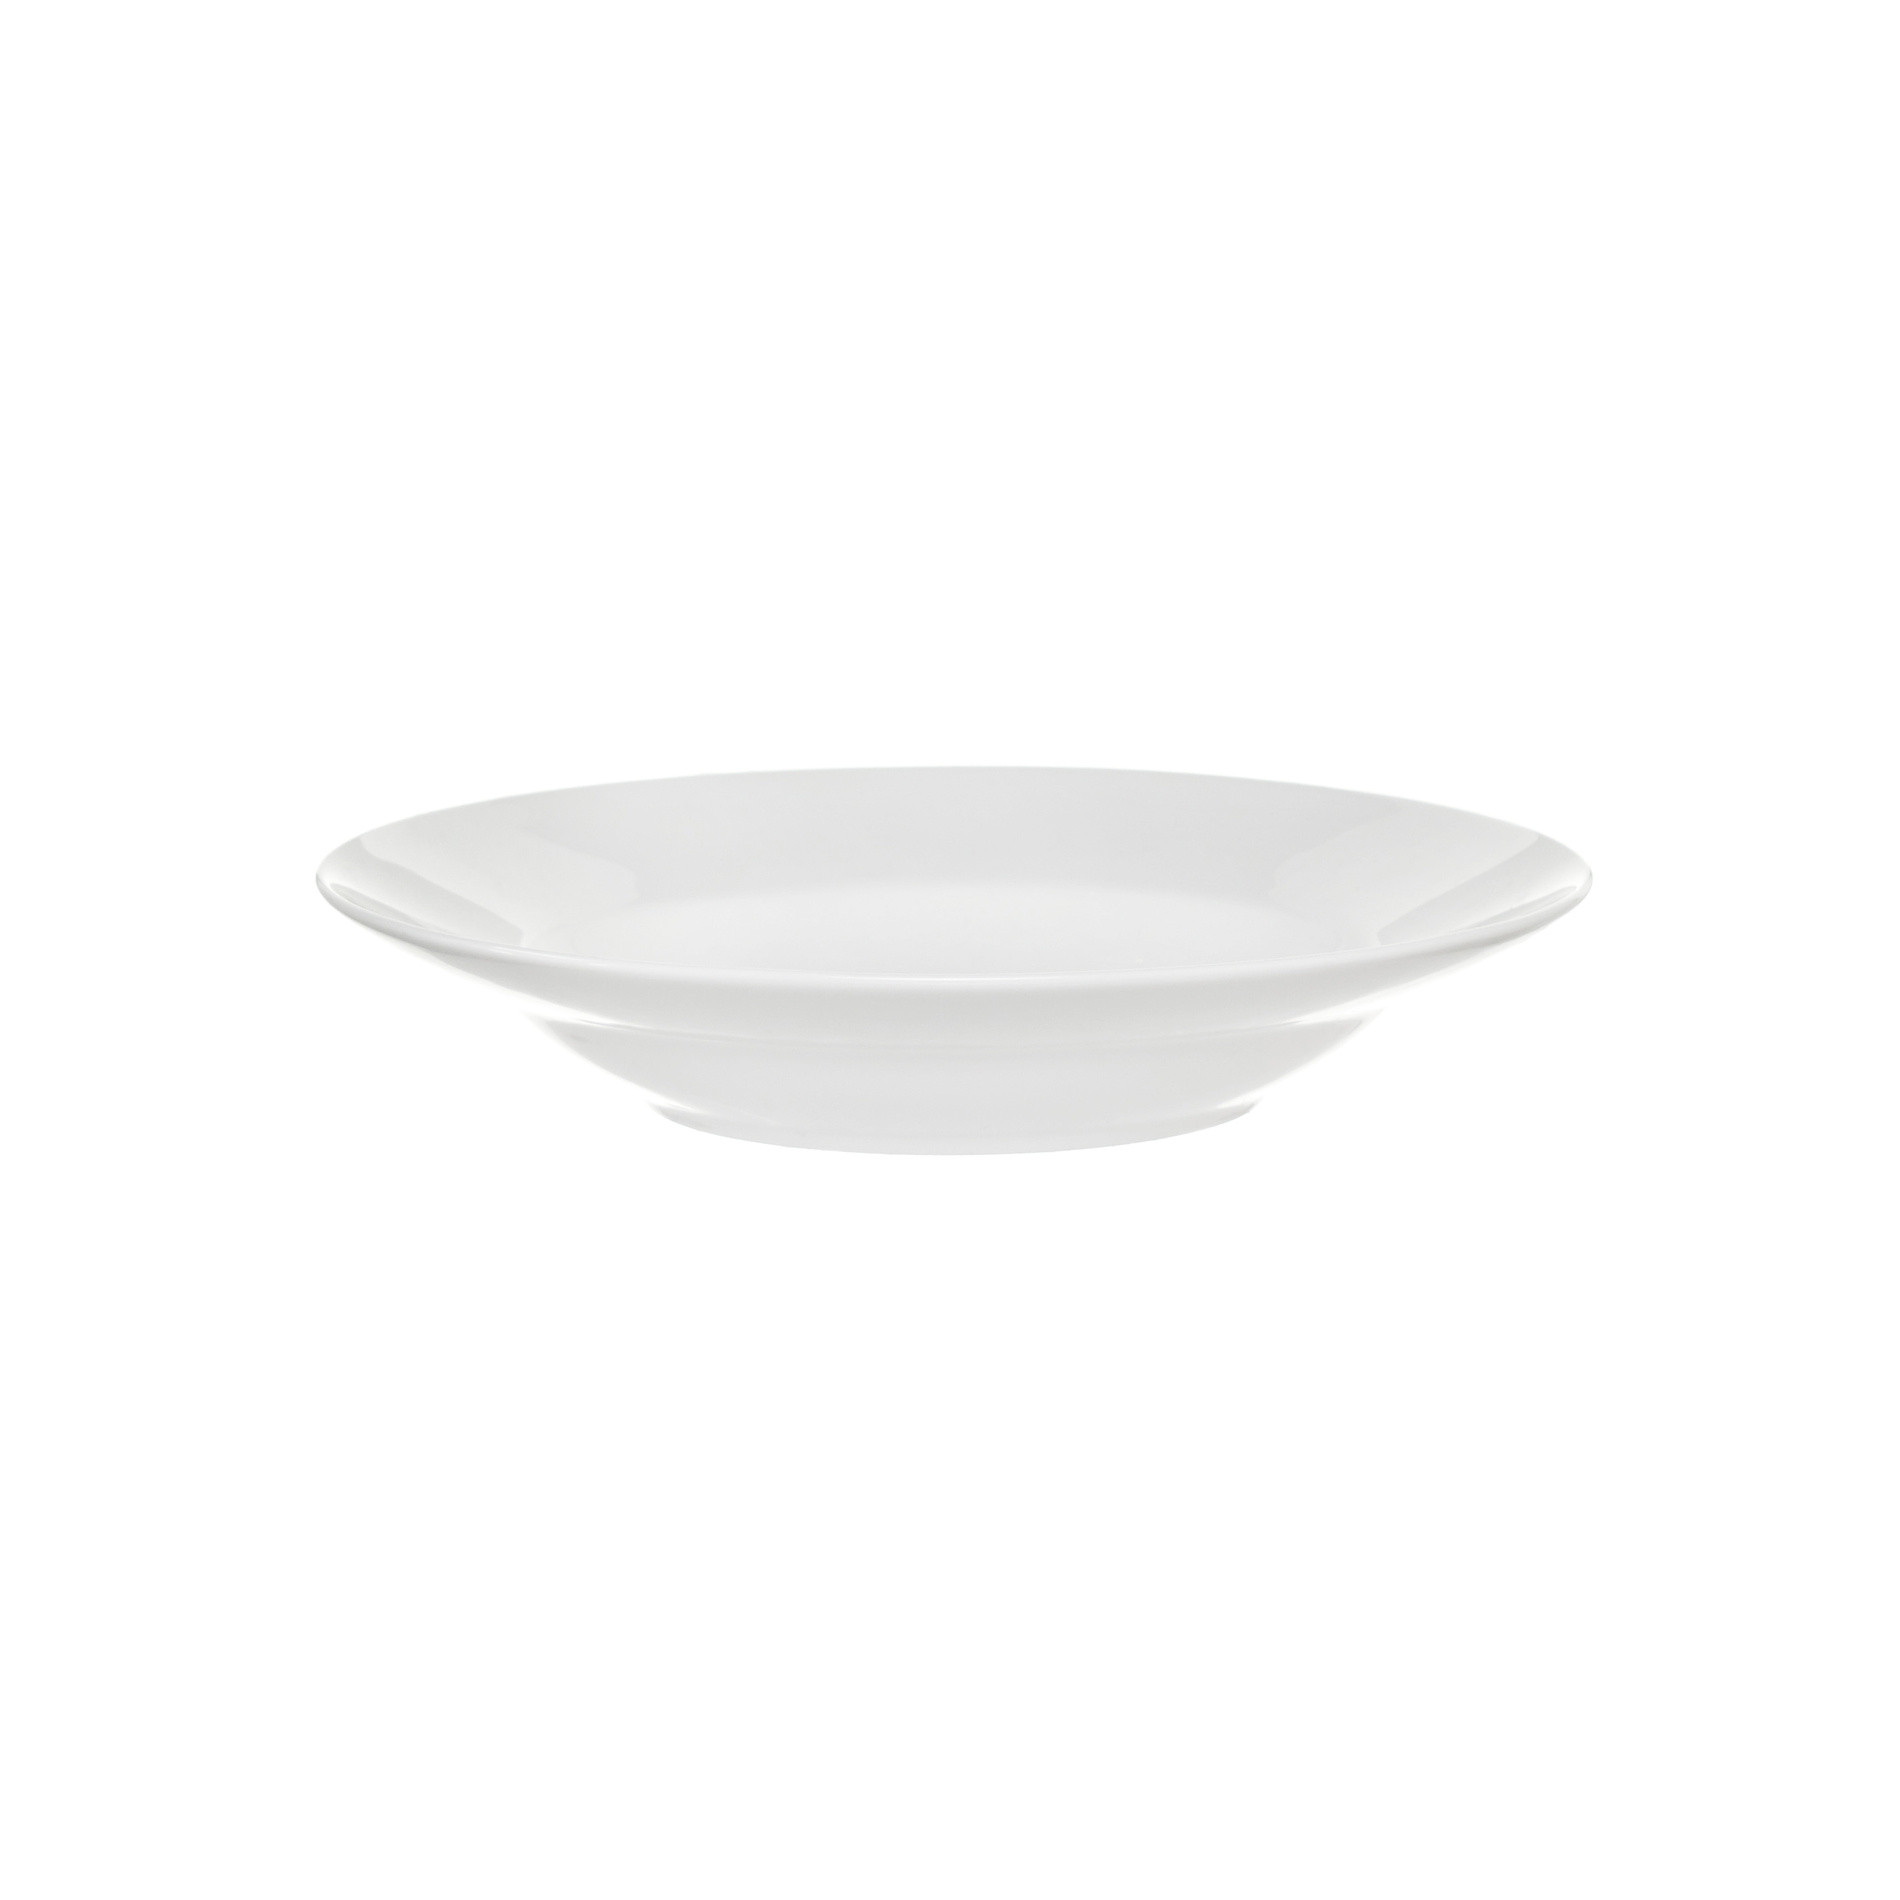 Veronica bowl, White, large image number 0